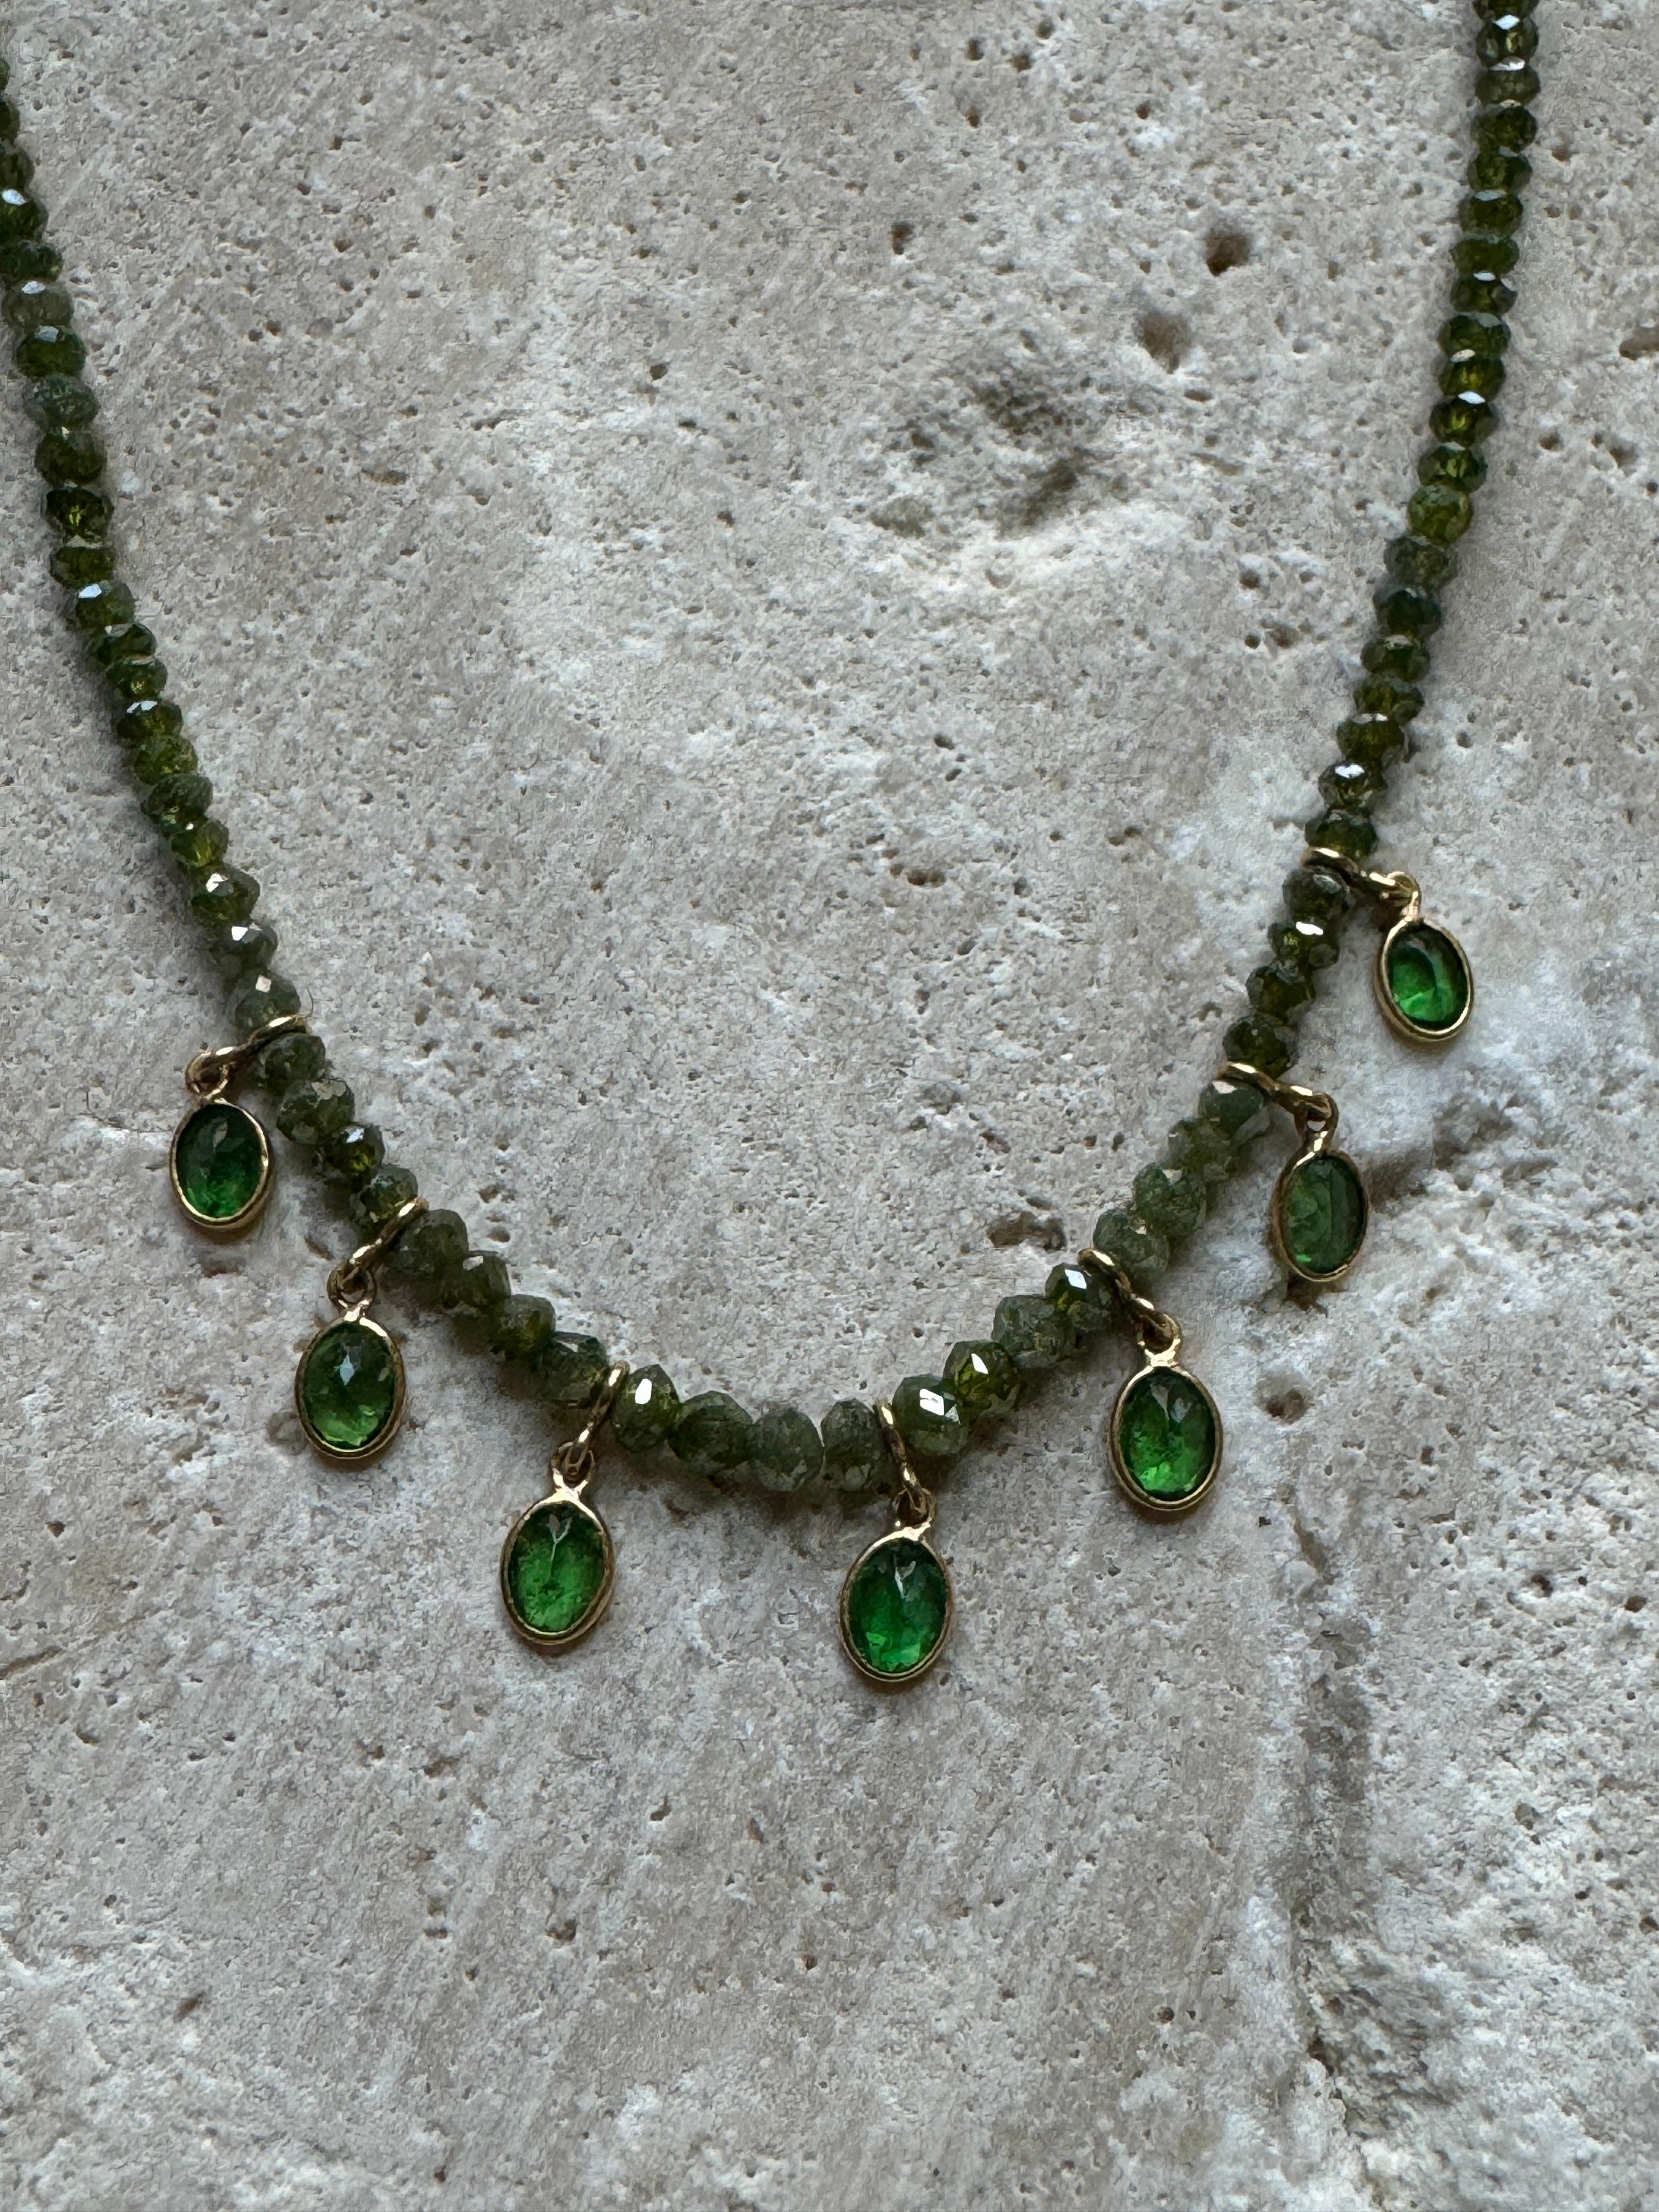 17.22 Carat Diamond Bead Chain in 18K Gold with Tsavorite Pears For Sale 4